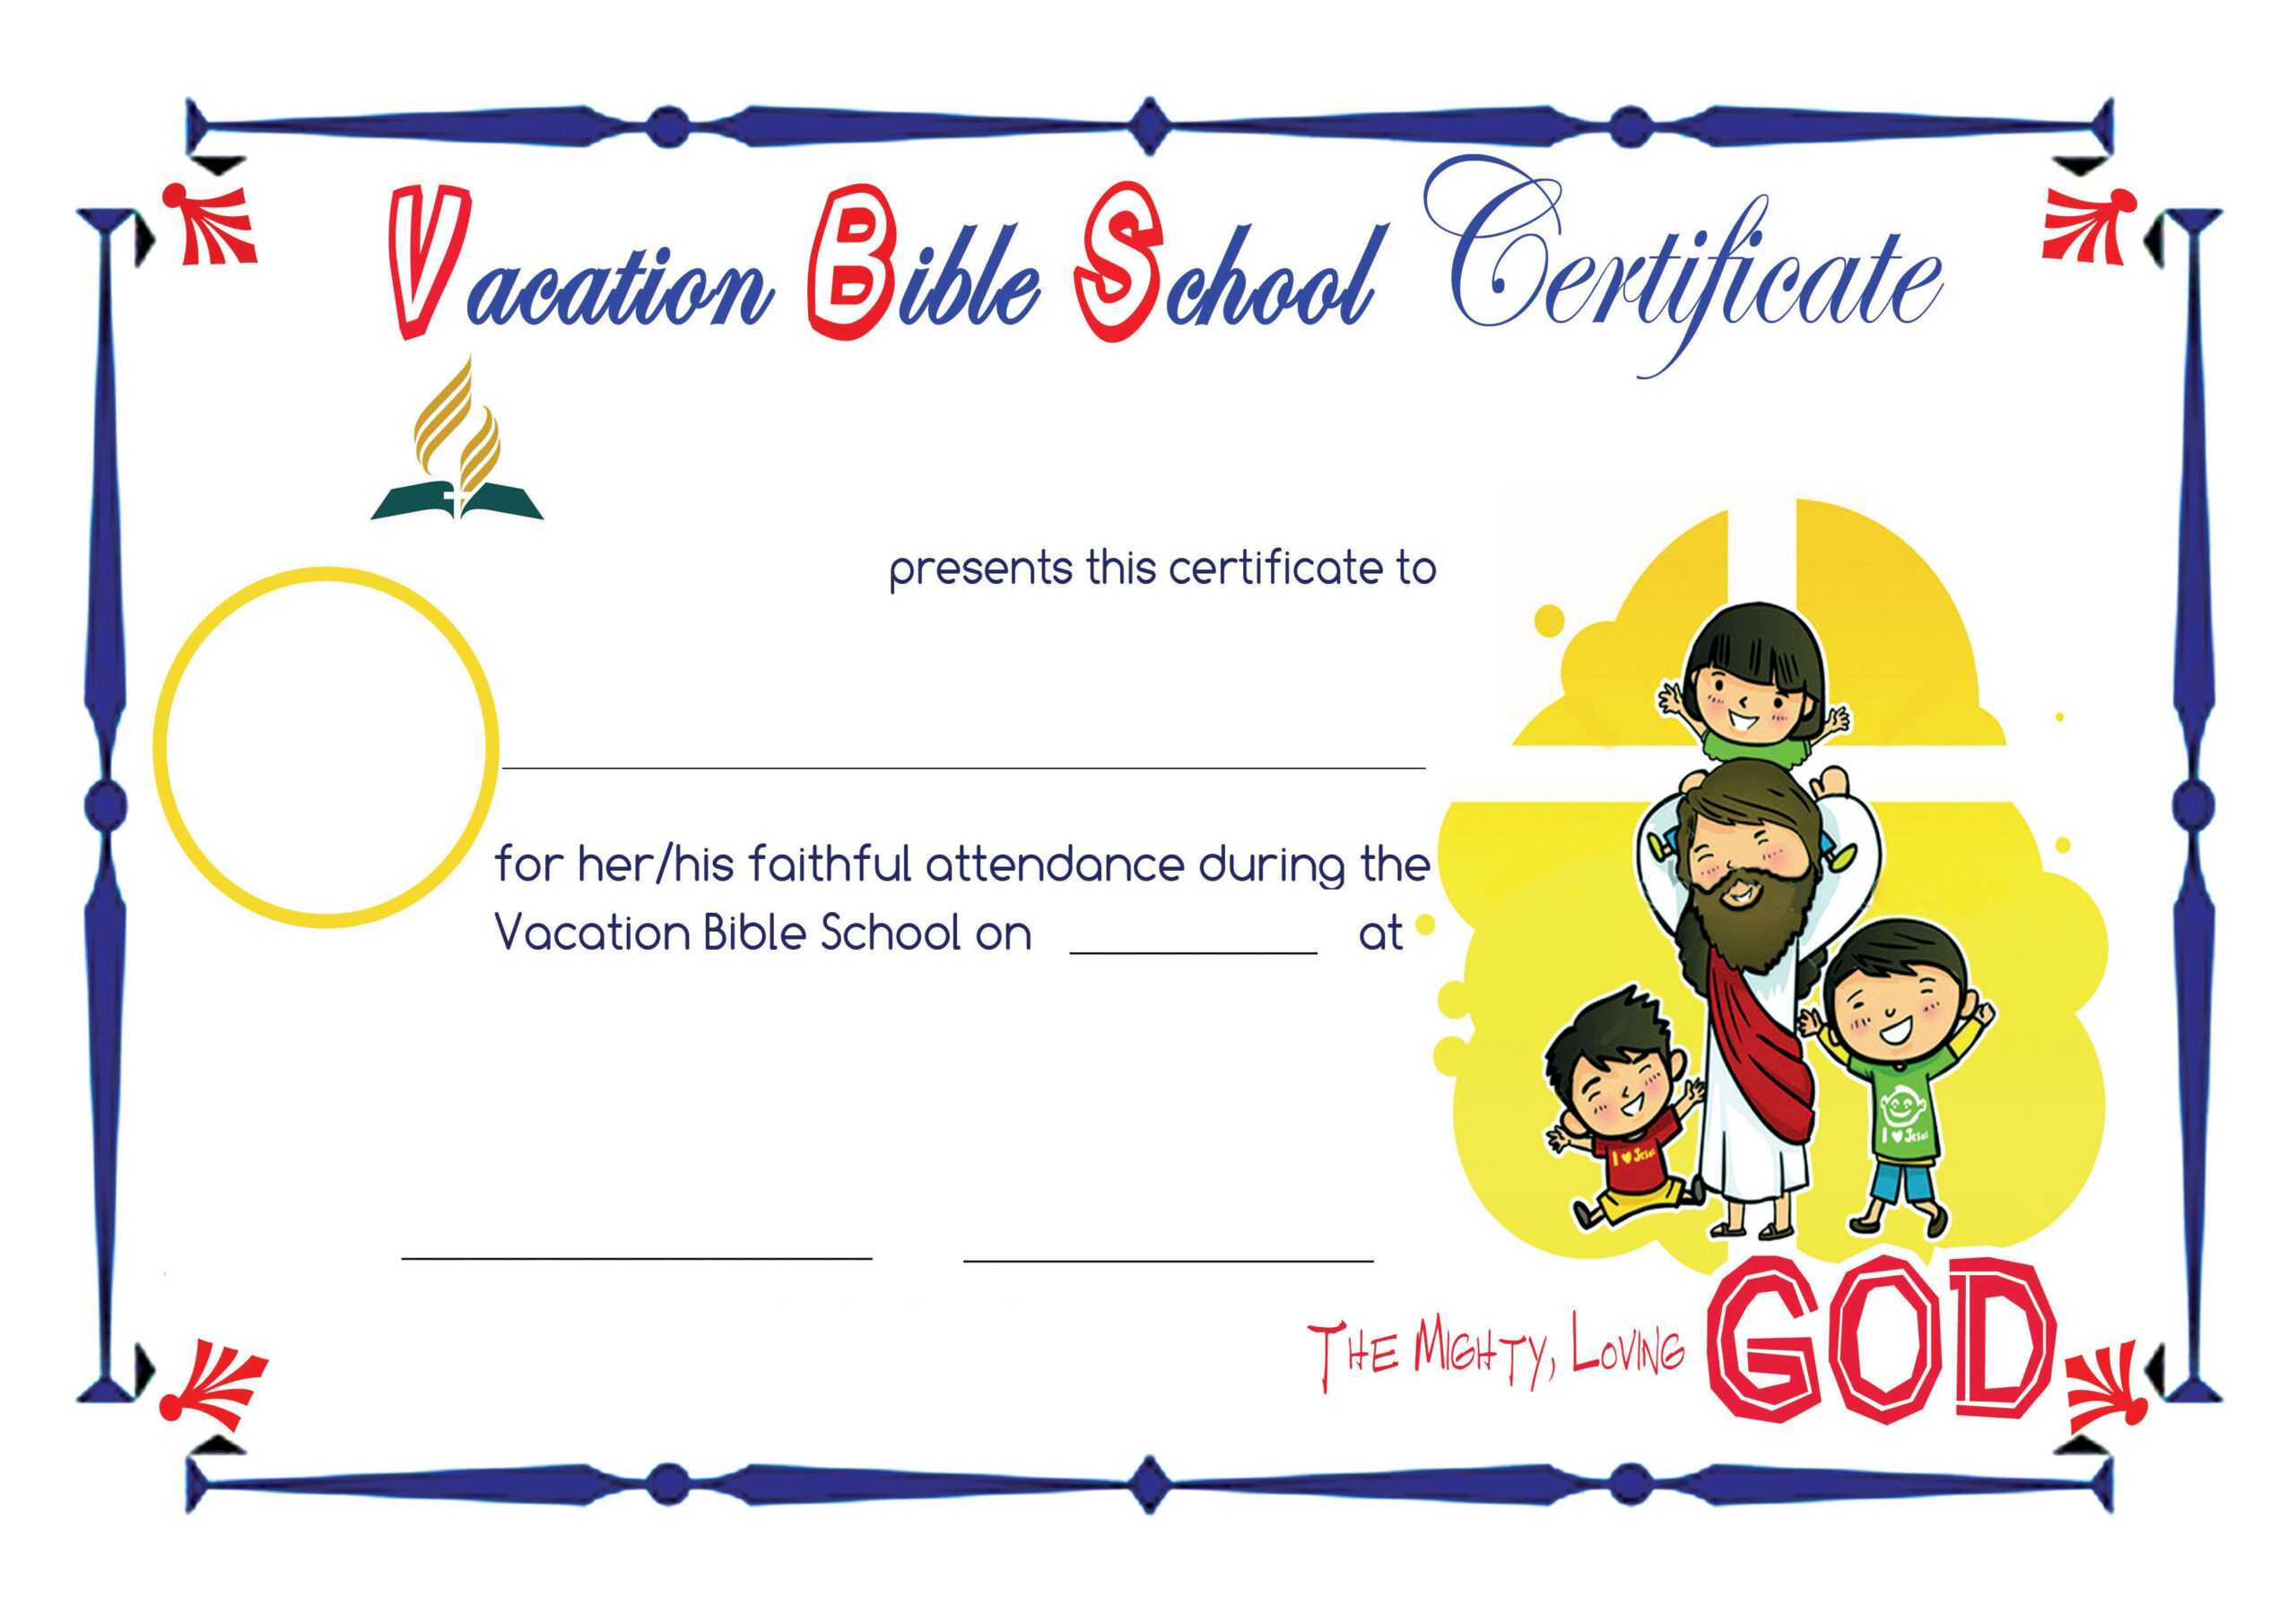 Bible School Certificates Pictures To Pin On Pinterest For School Certificate Templates Free